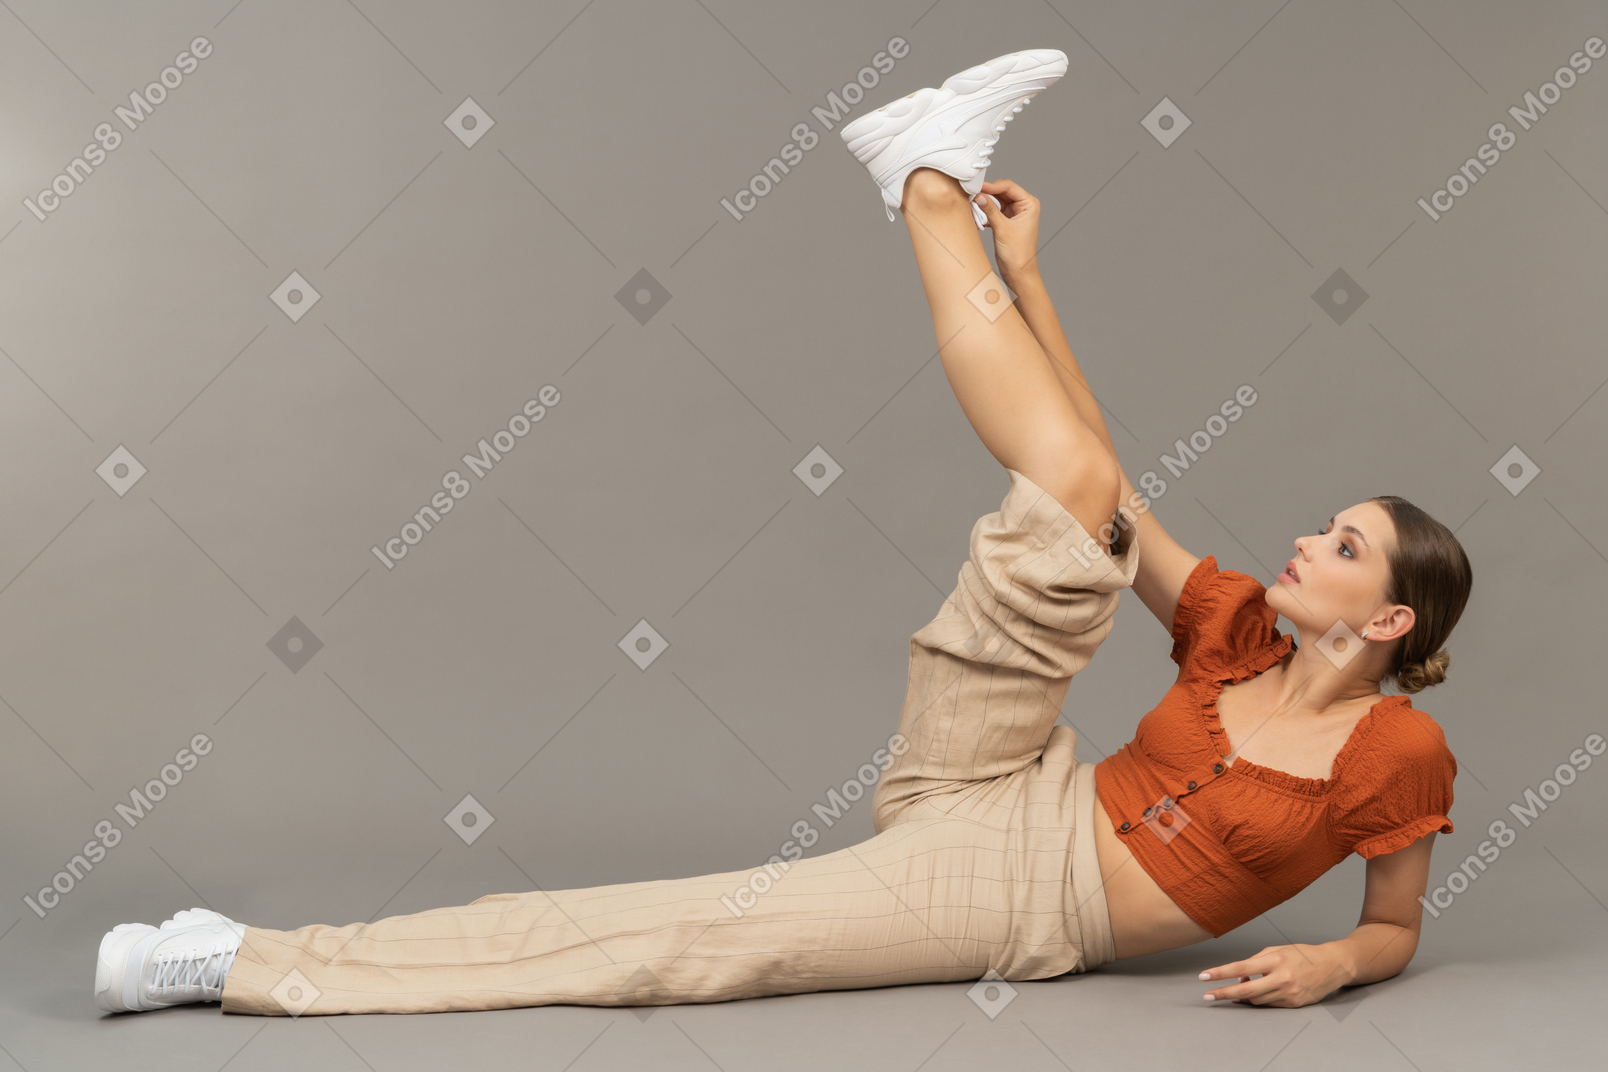 Young woman lies down and puts her leg up